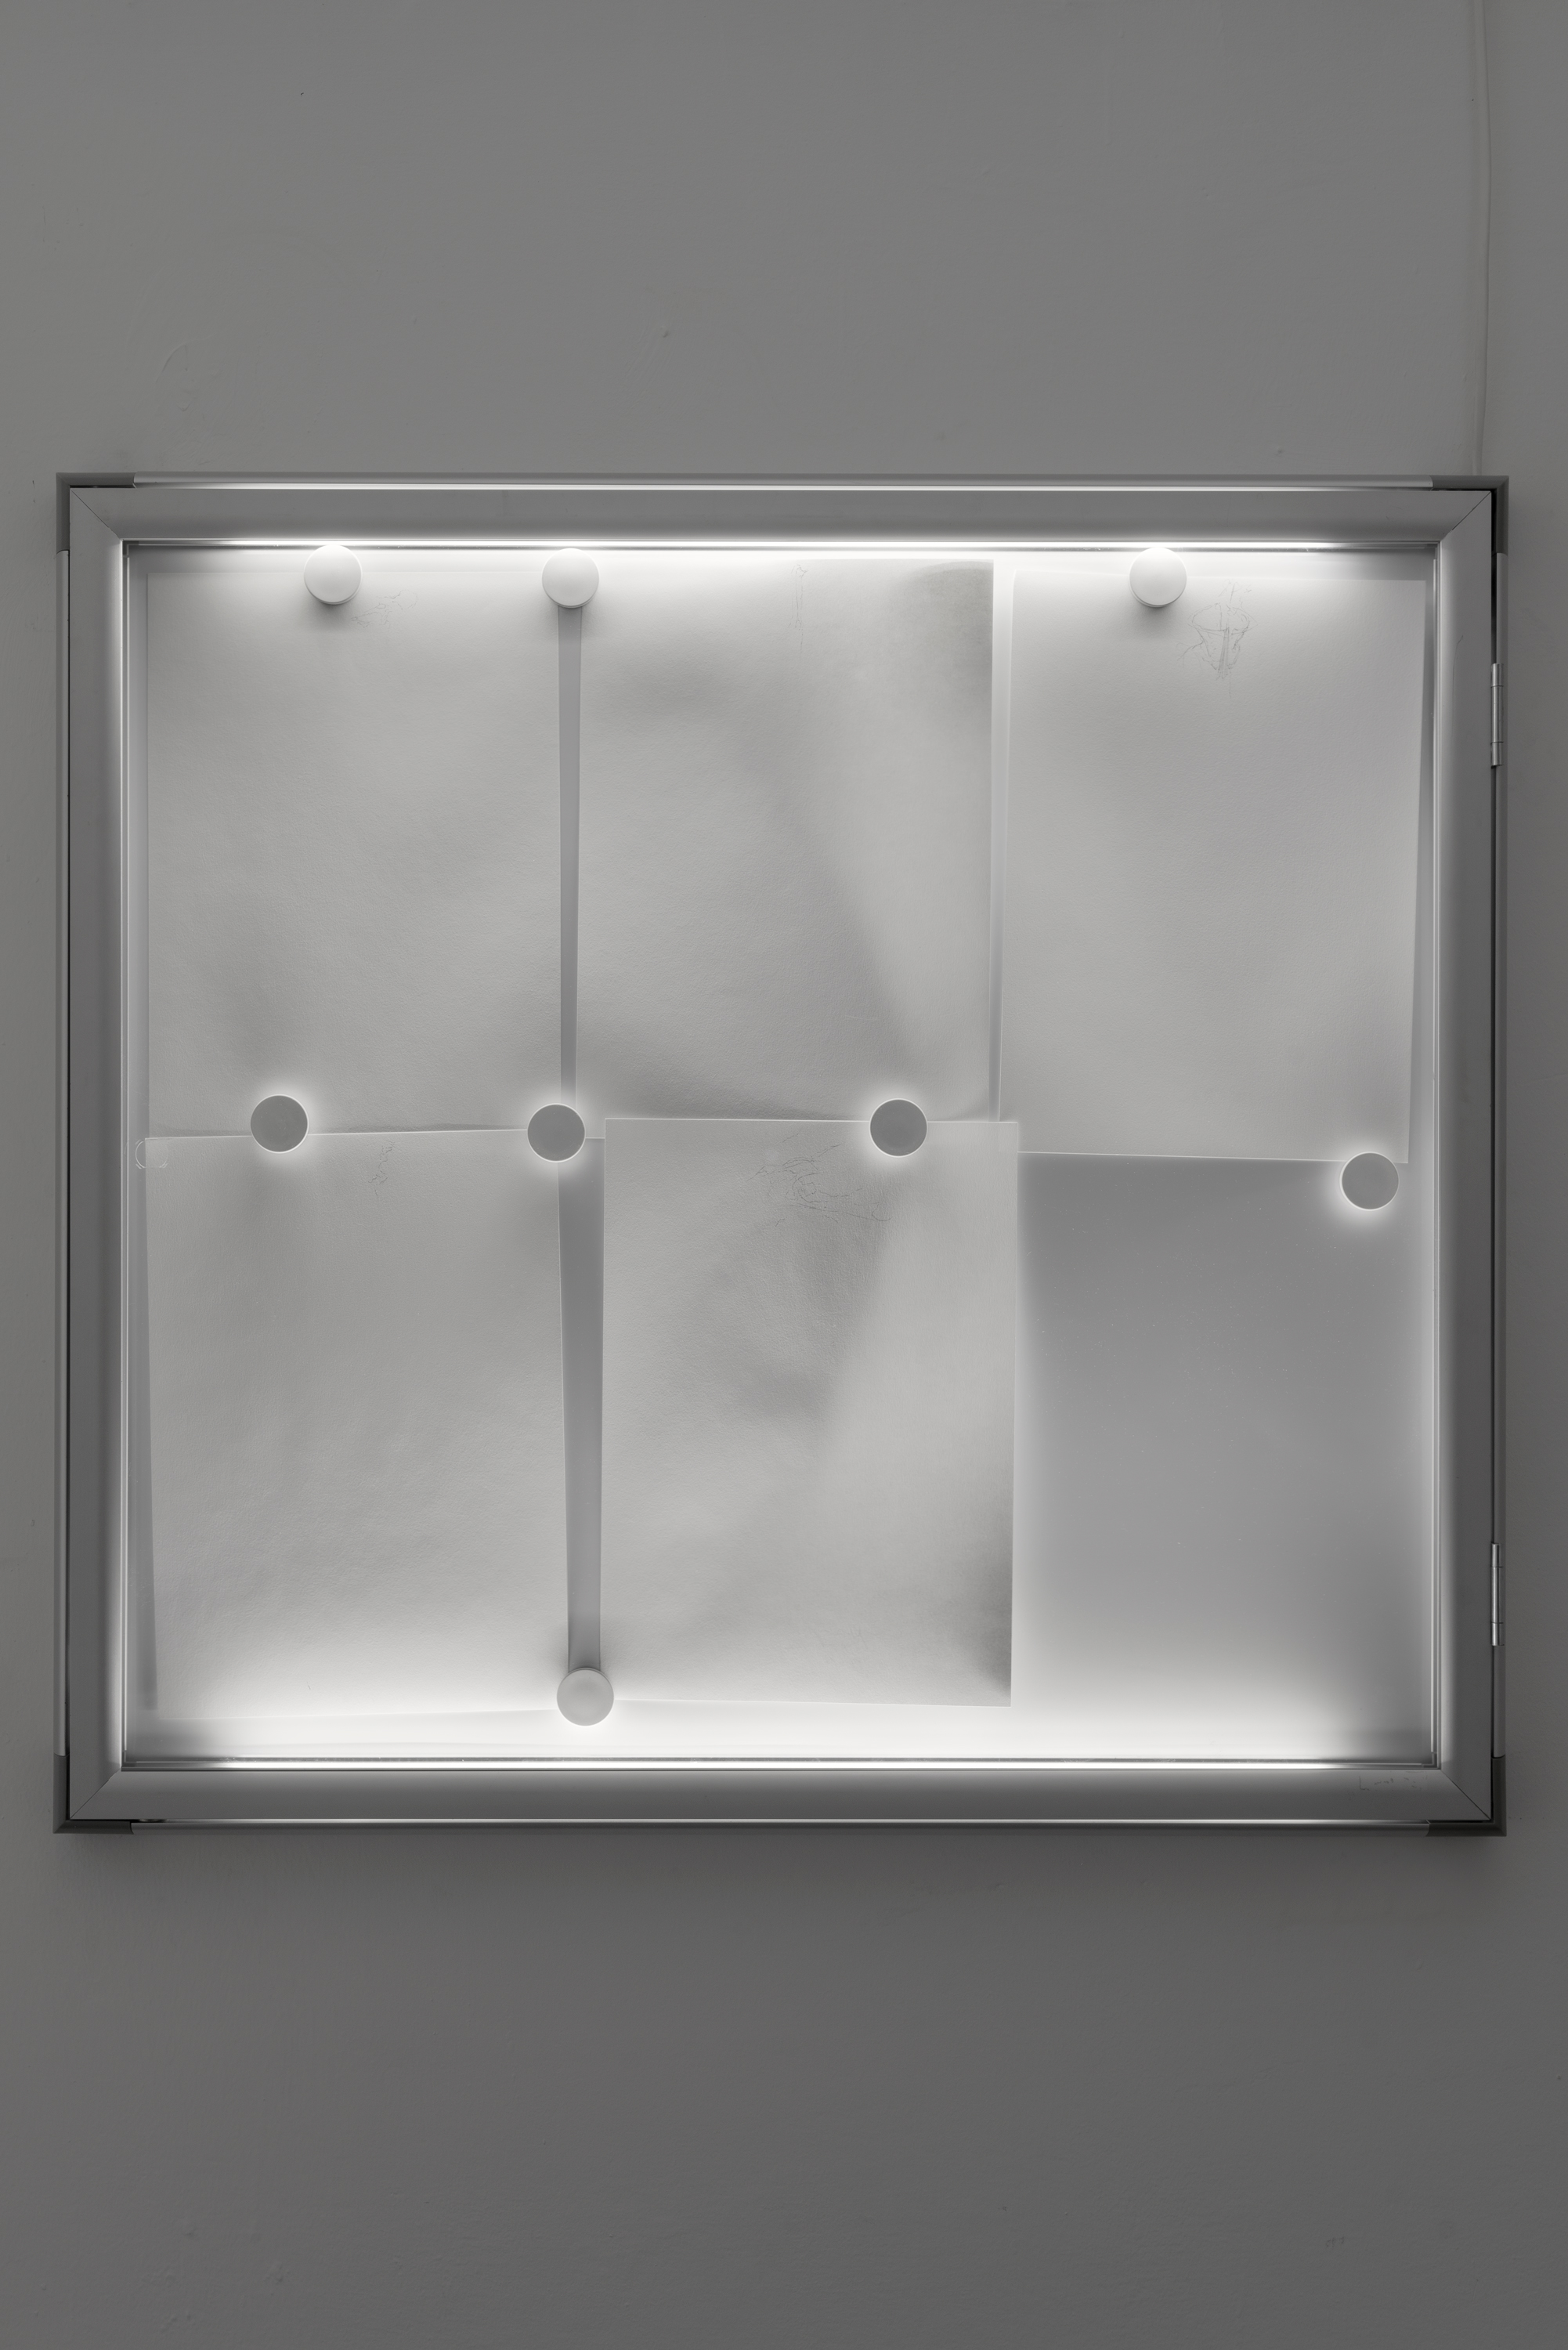  Philip Seibel,  Untitled , 2016-2019, pencil on A4 paper, magnets, display case, LED lights 